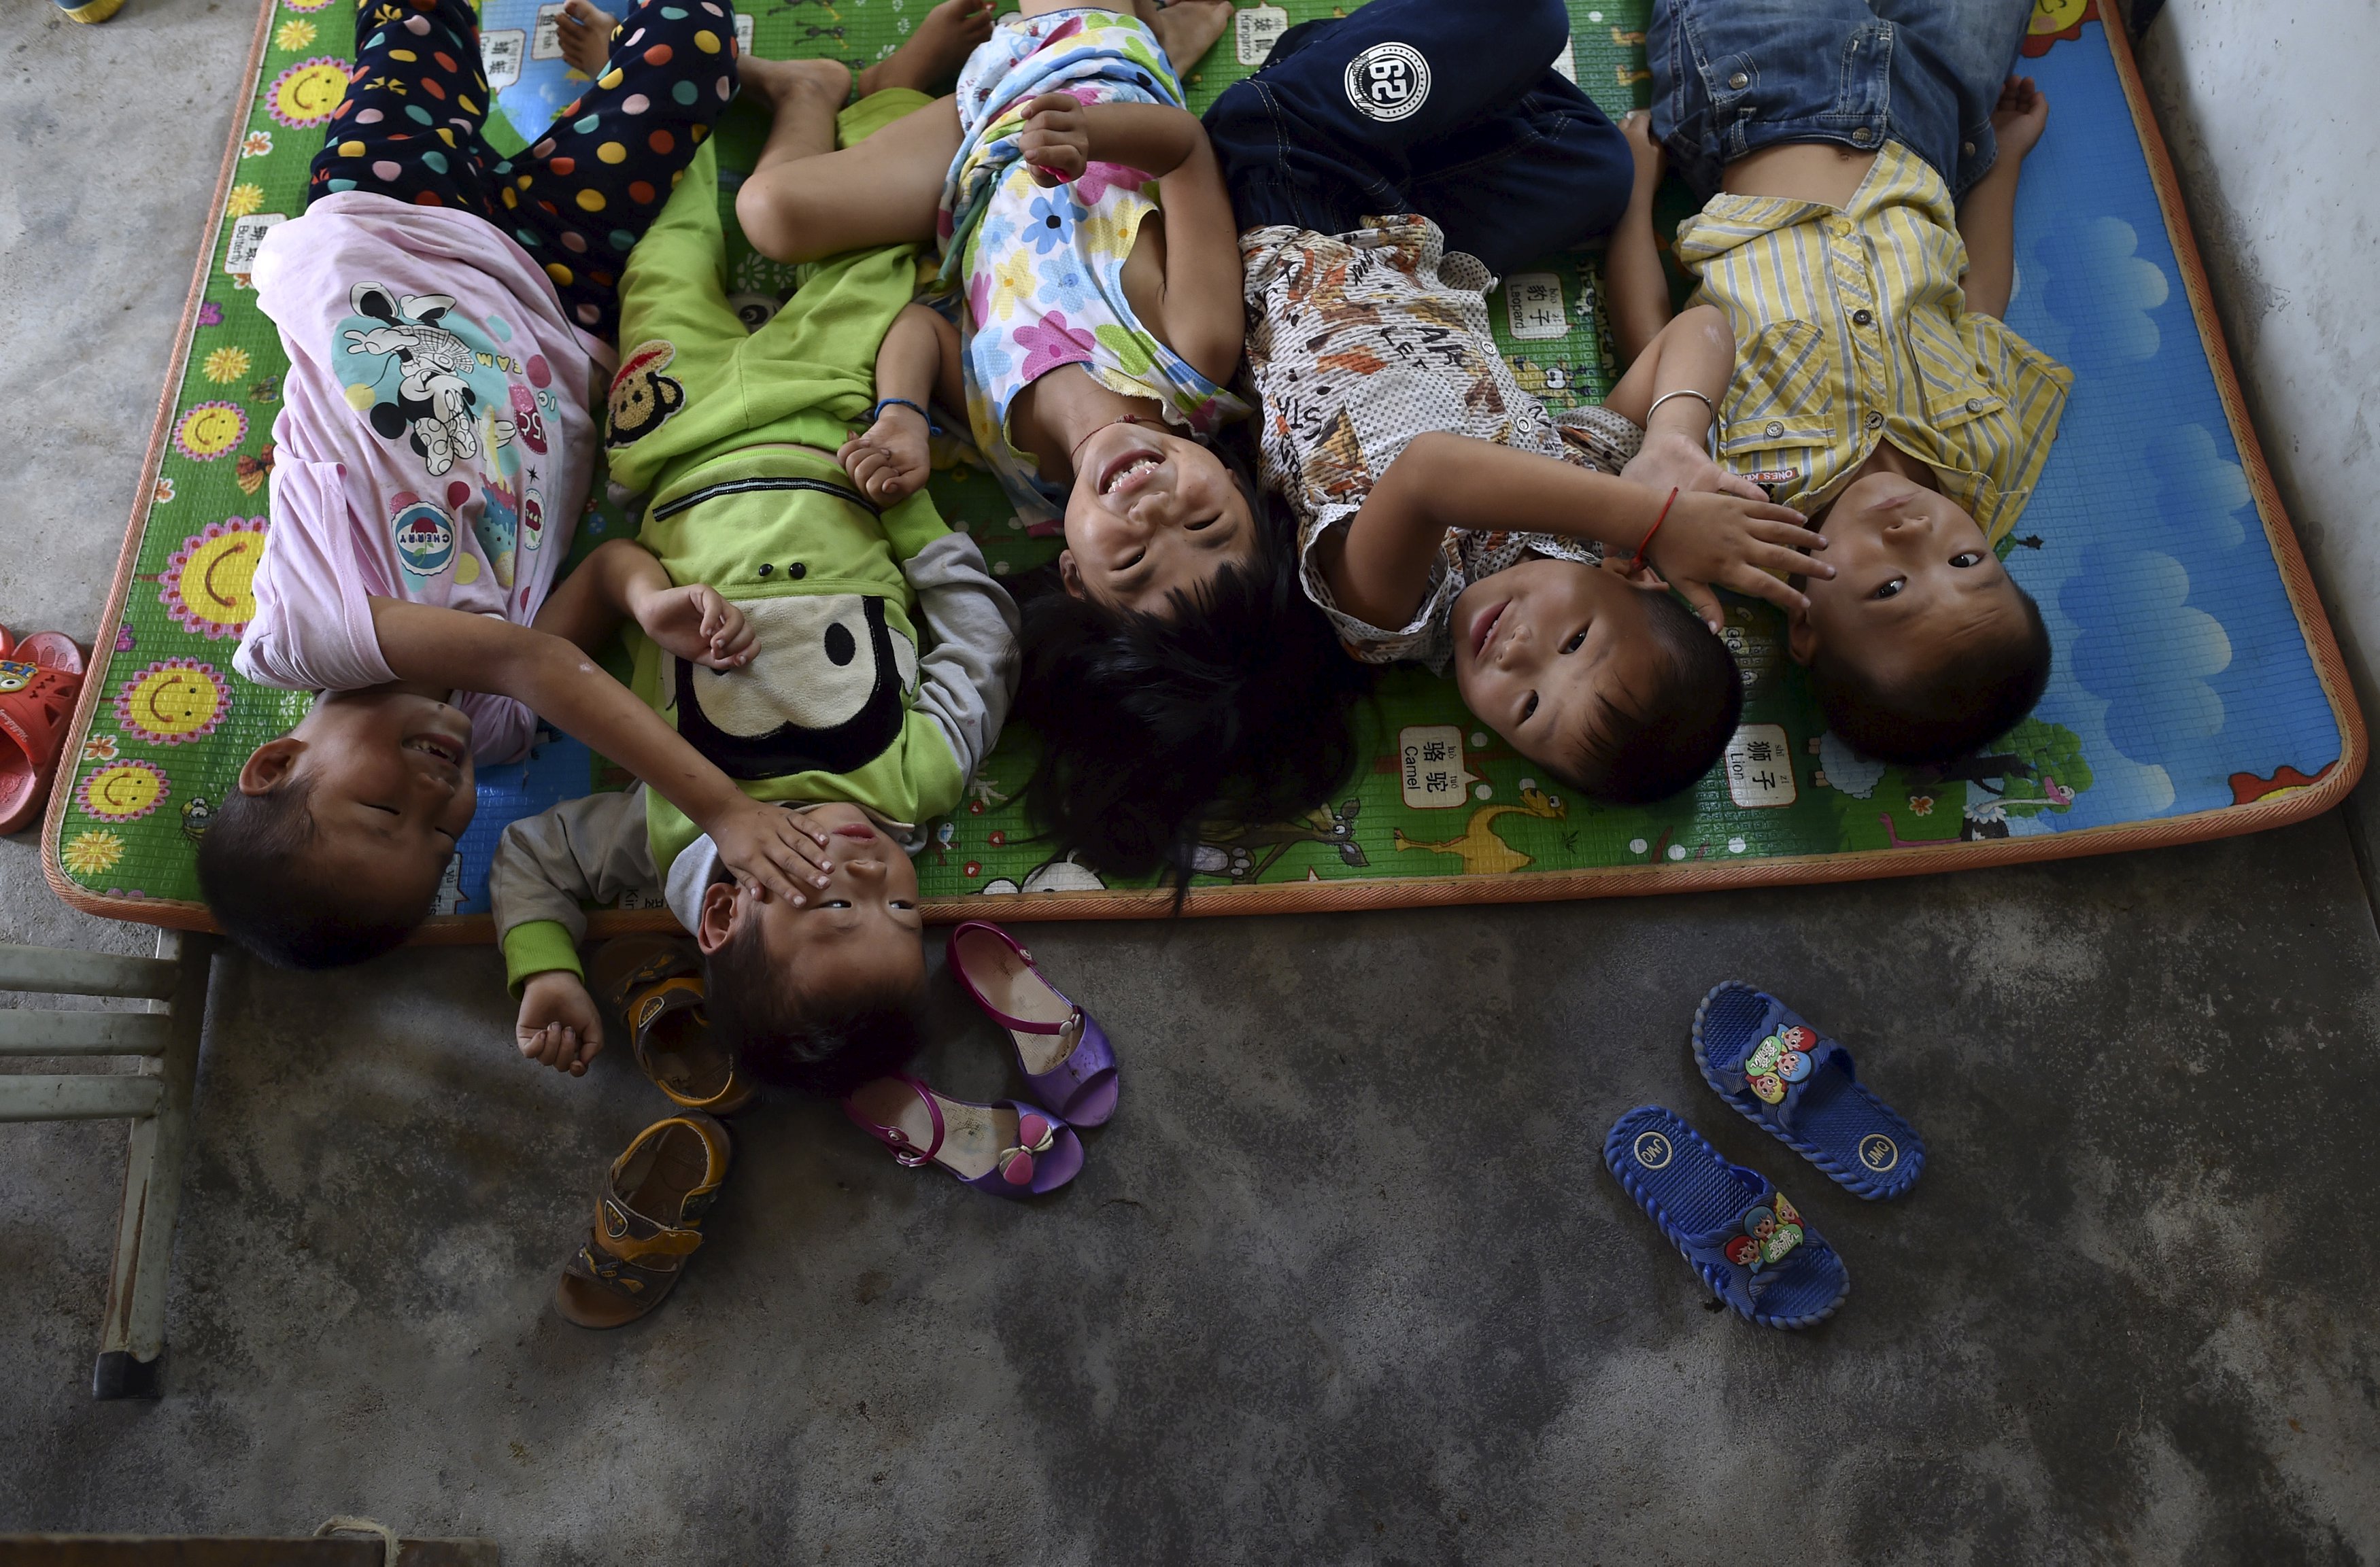 Students play as they sleep on a mat on the ground at Dalu primary school in Gucheng township of Hefei, Anhui province, China, September 8, 2015. The school, opened in 2006 and has never acquired a legal license, may face a shutdown order from the government. There are currently over 160 students in the school, mostly "leftover children", whose parents left their hometown to earn a living, local media reported. Picture taken September 8, 2015. REUTERS/Stringer CHINA OUT. NO COMMERCIAL OR EDITORIAL SALES IN CHINA